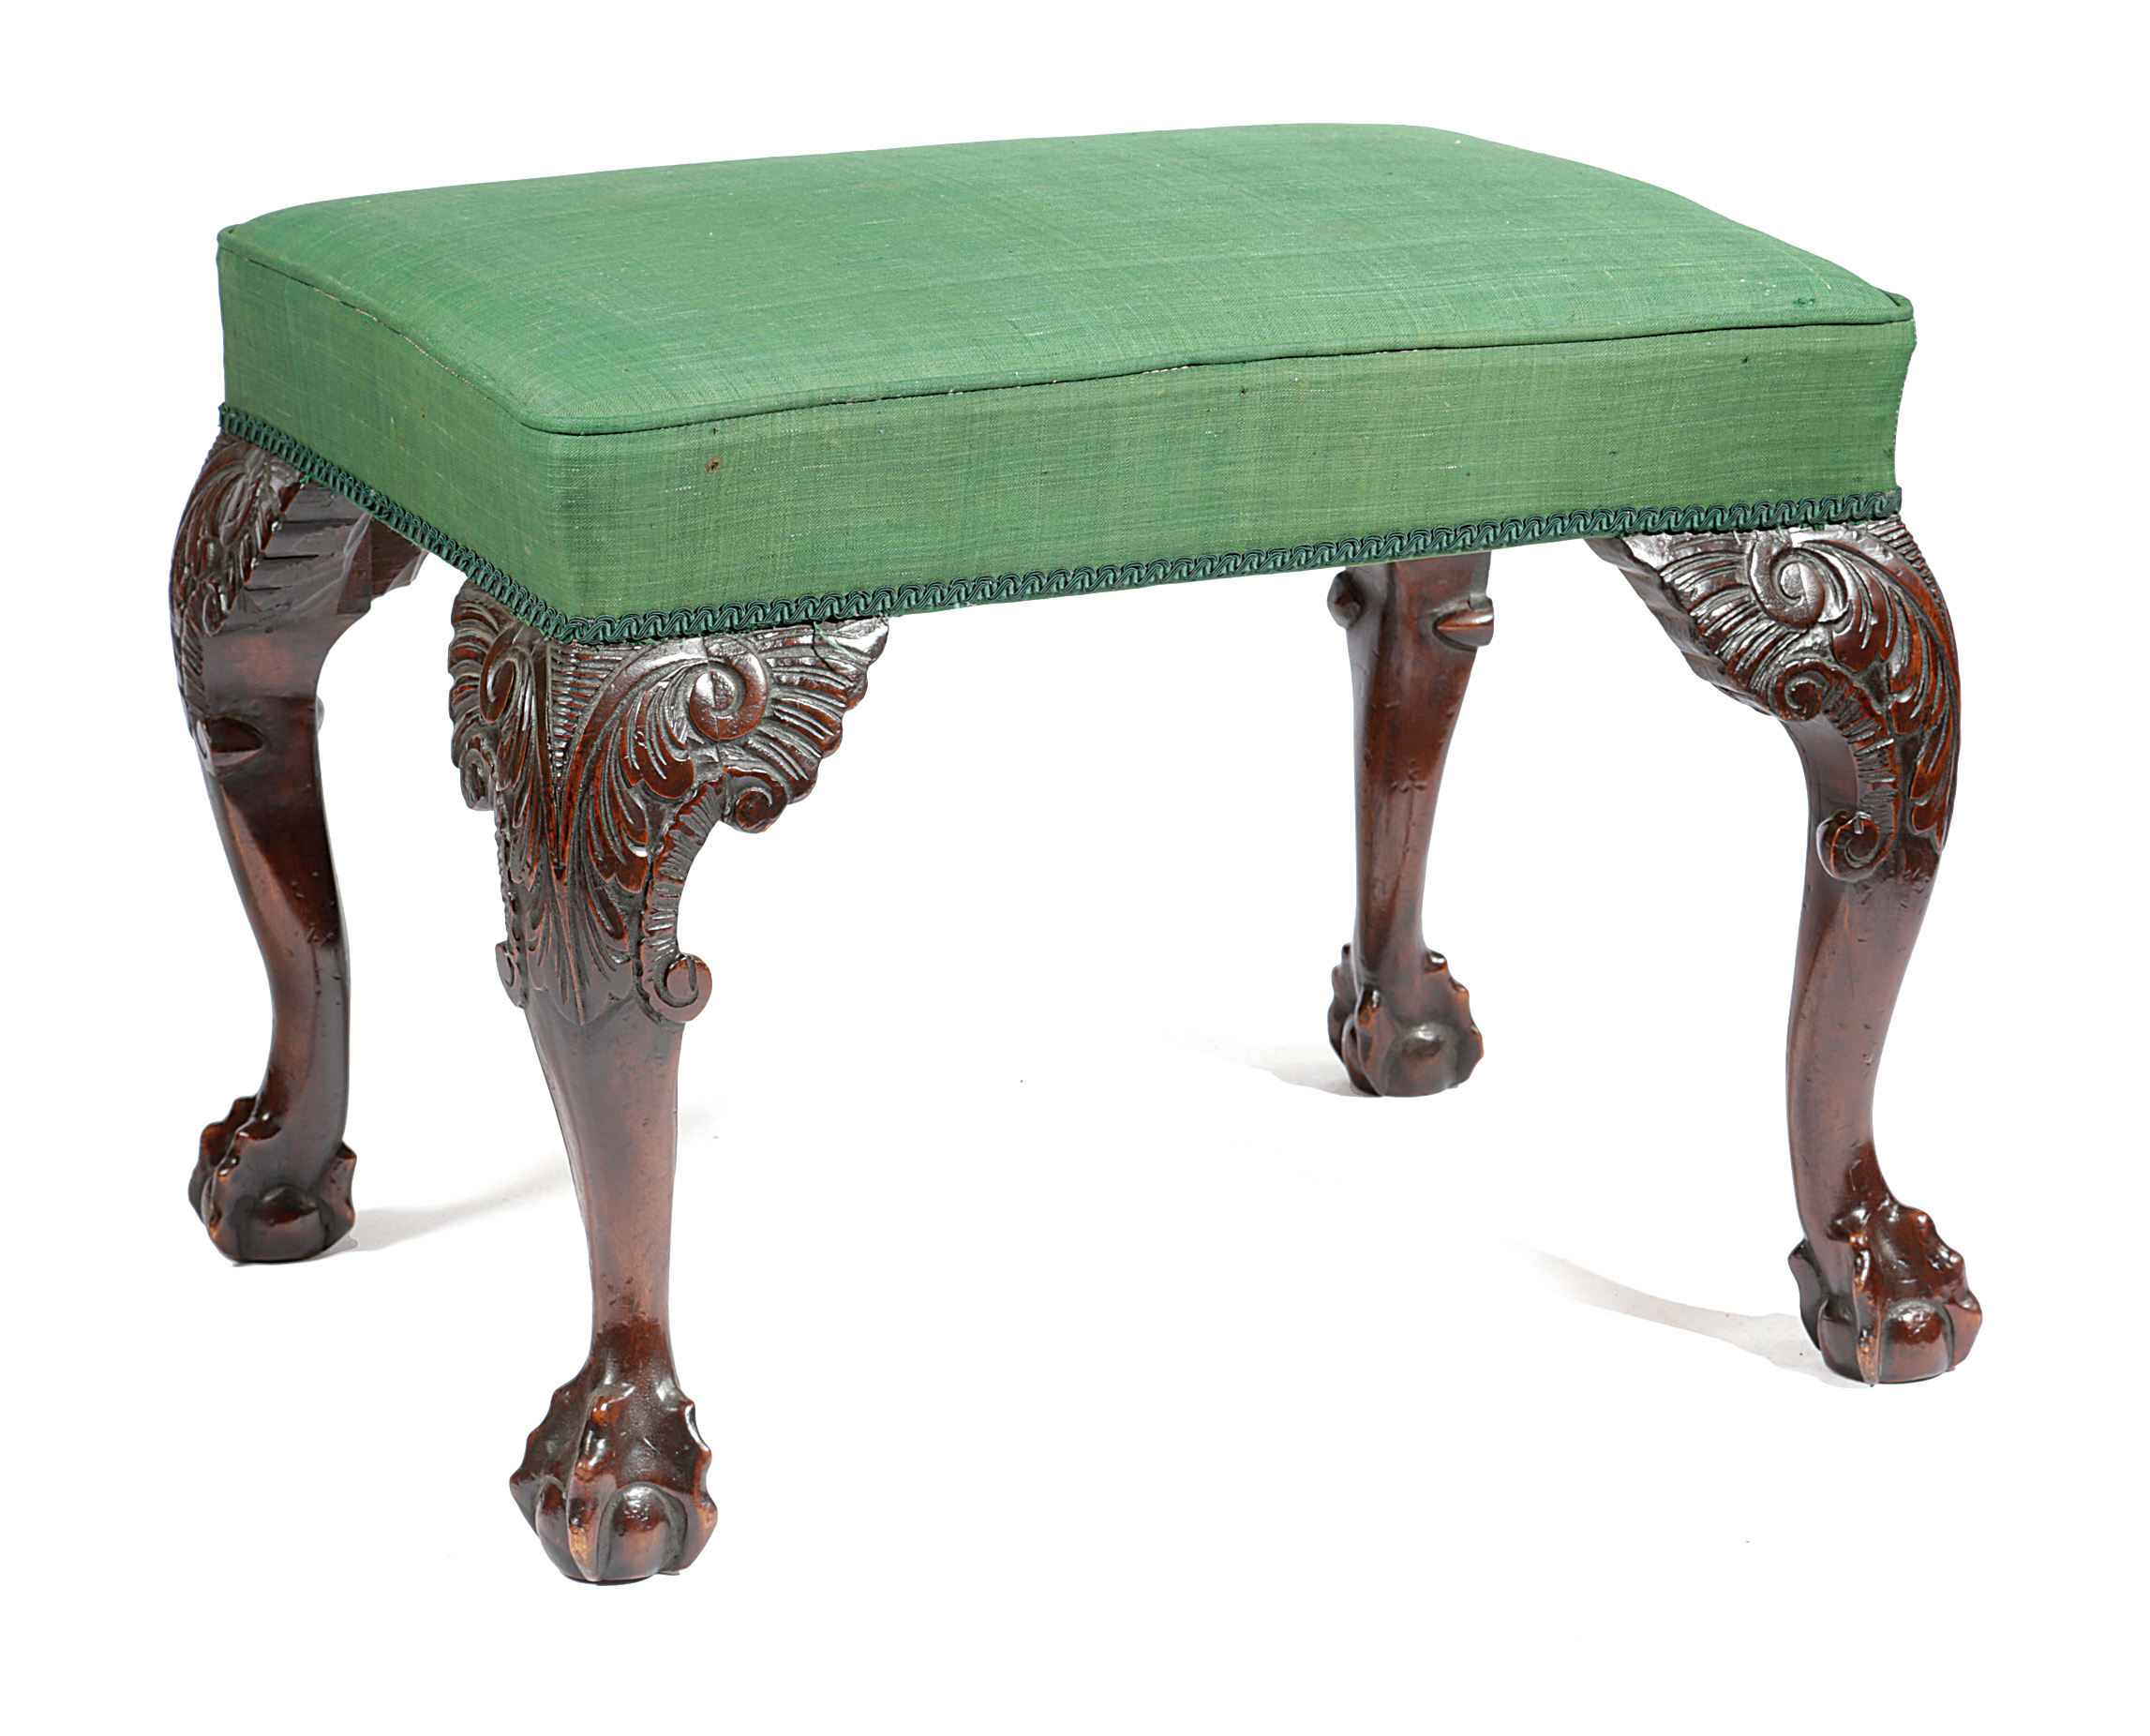 A GEORGE II IRISH WALNUT STOOL C.1740 the padded seat covered with green fabric, on cabriole legs